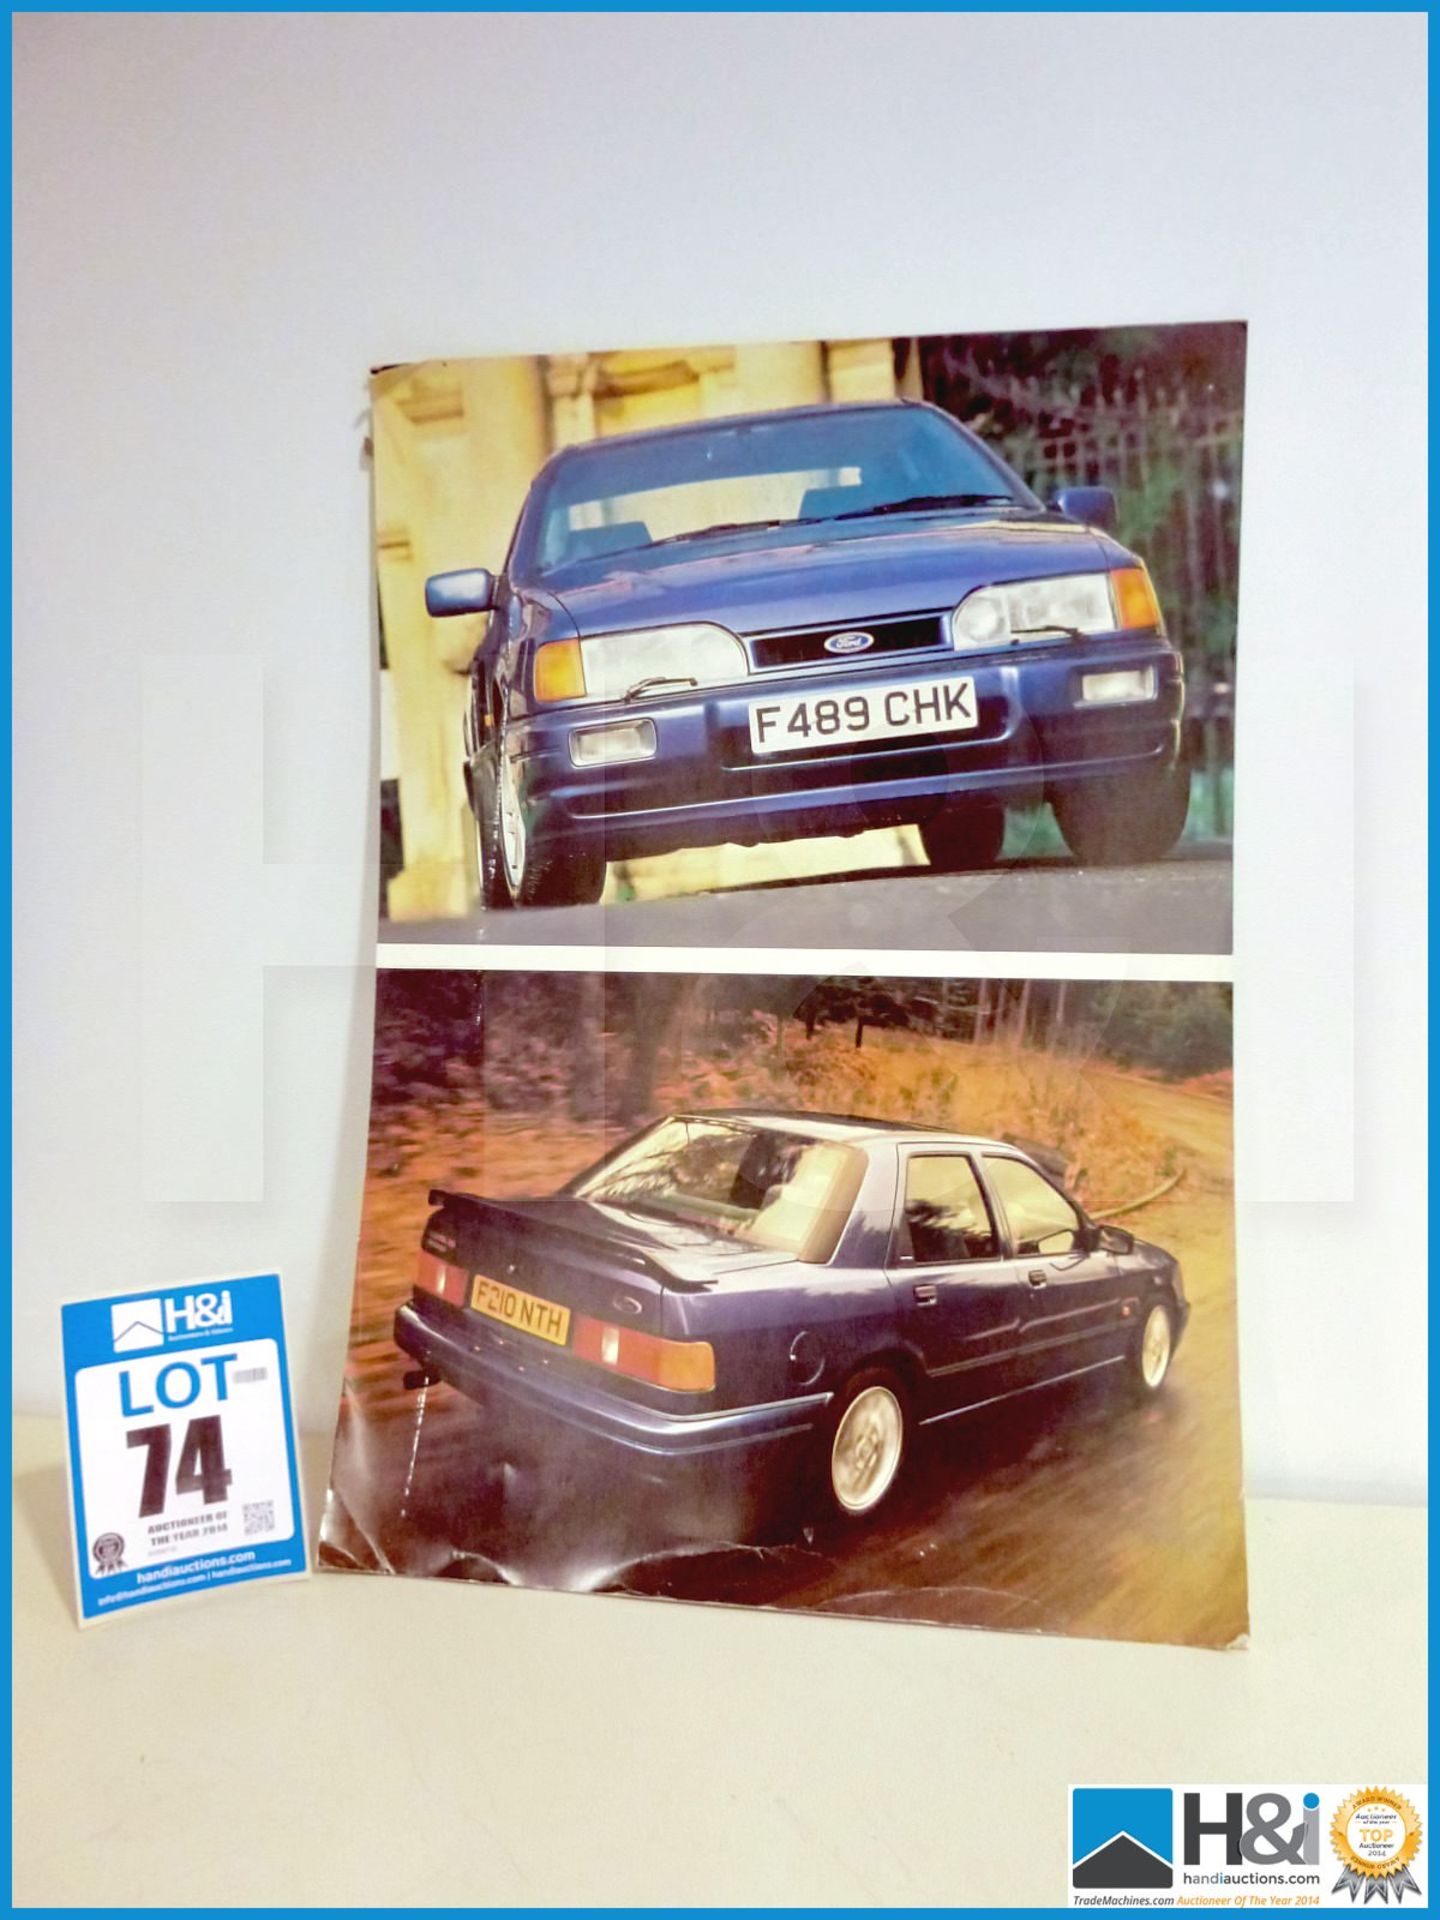 Genuine Ford Sierra Sapphire promo artwork from the Cosworth Archives. Should fire up happy memories